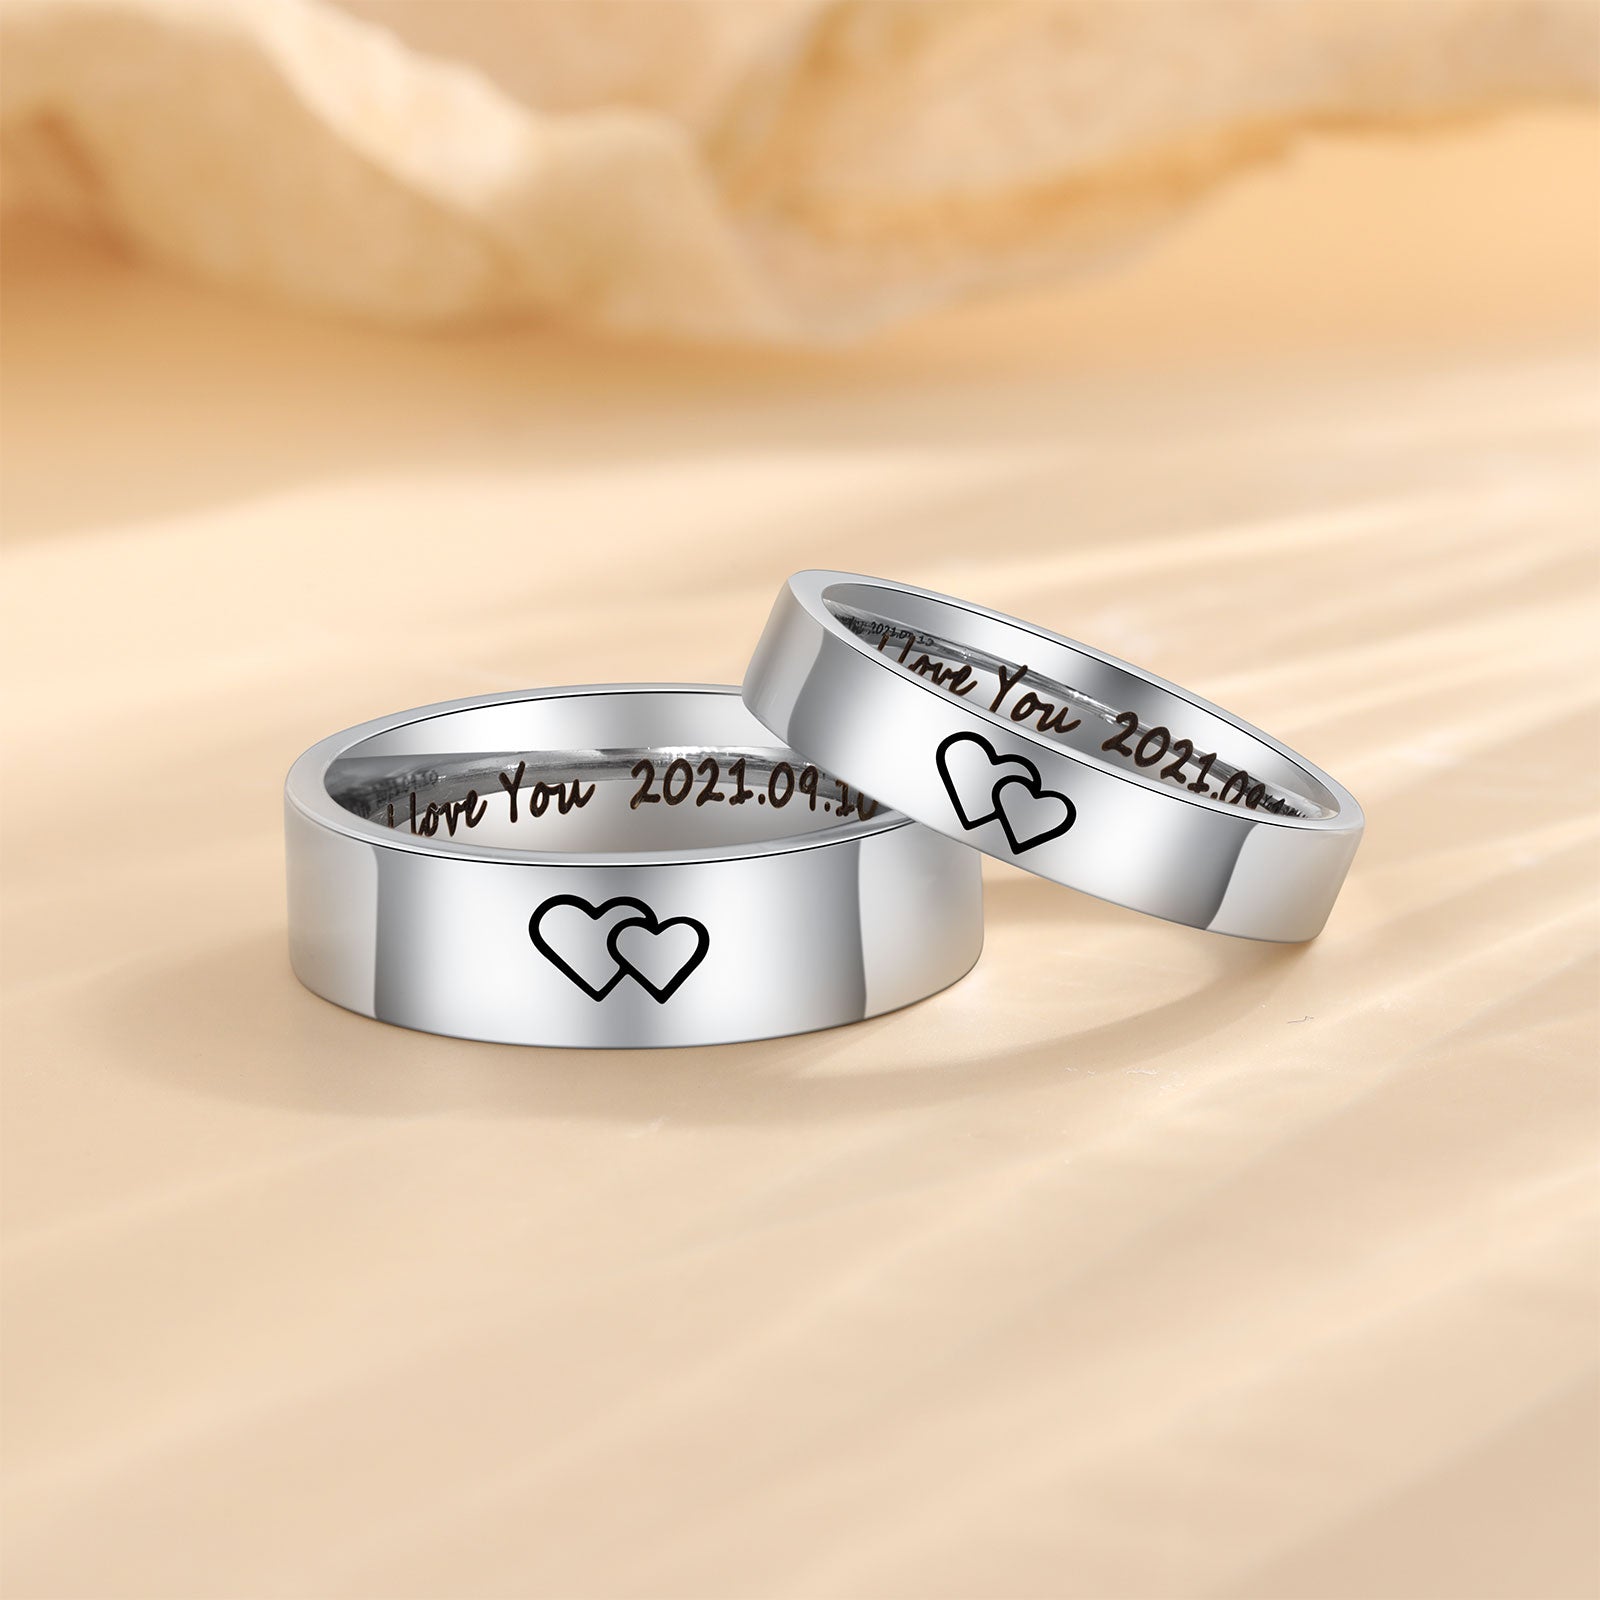 Think Engraved wedding Ring Personalized His and Hers Traditional Promise Ring or Wedding Ring Set Couples Rings